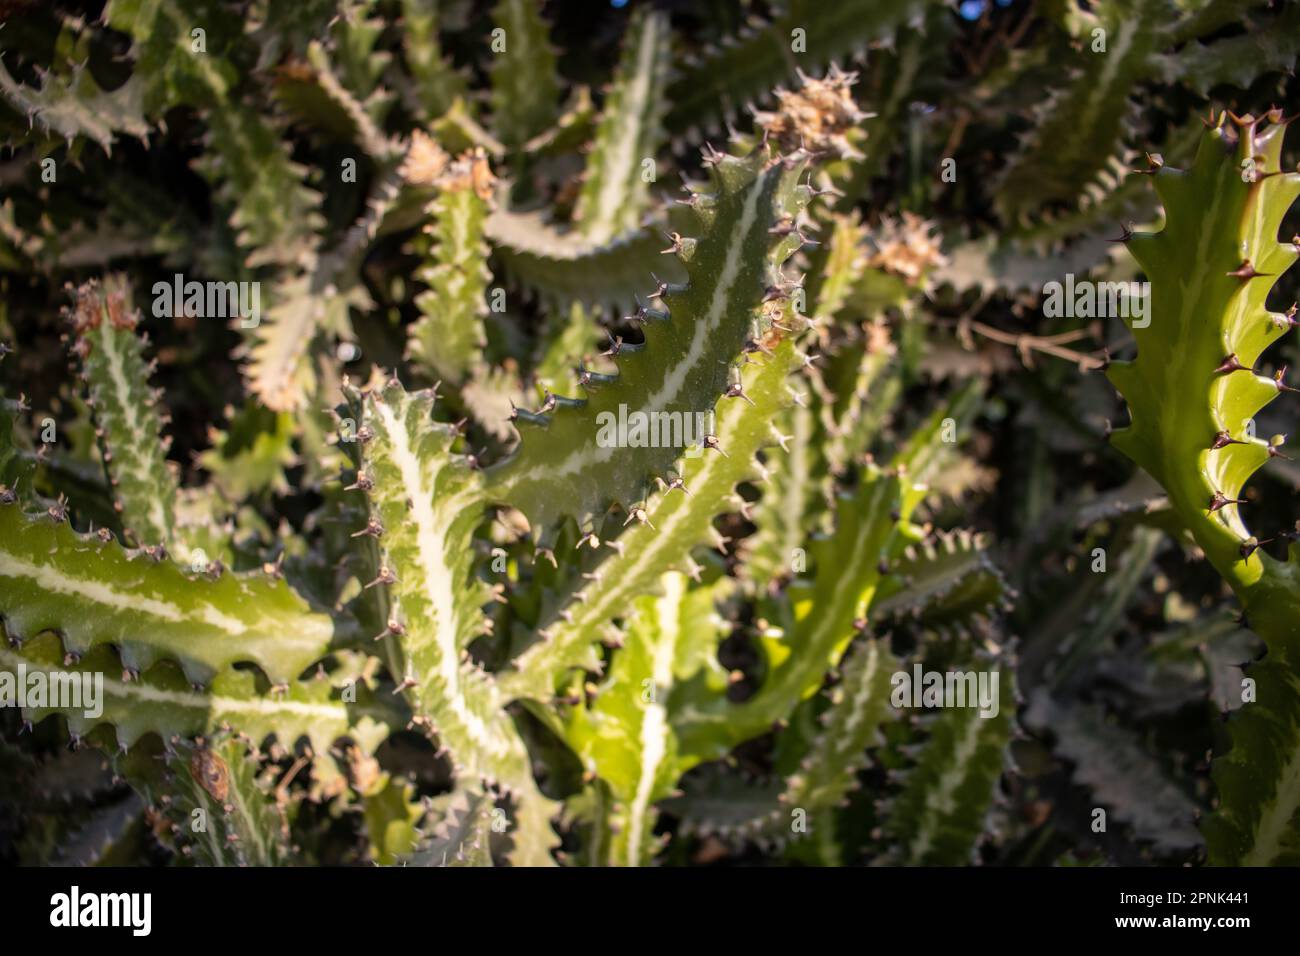 lose up of a dark green tropical Cactus used for a hedge Stock Photo